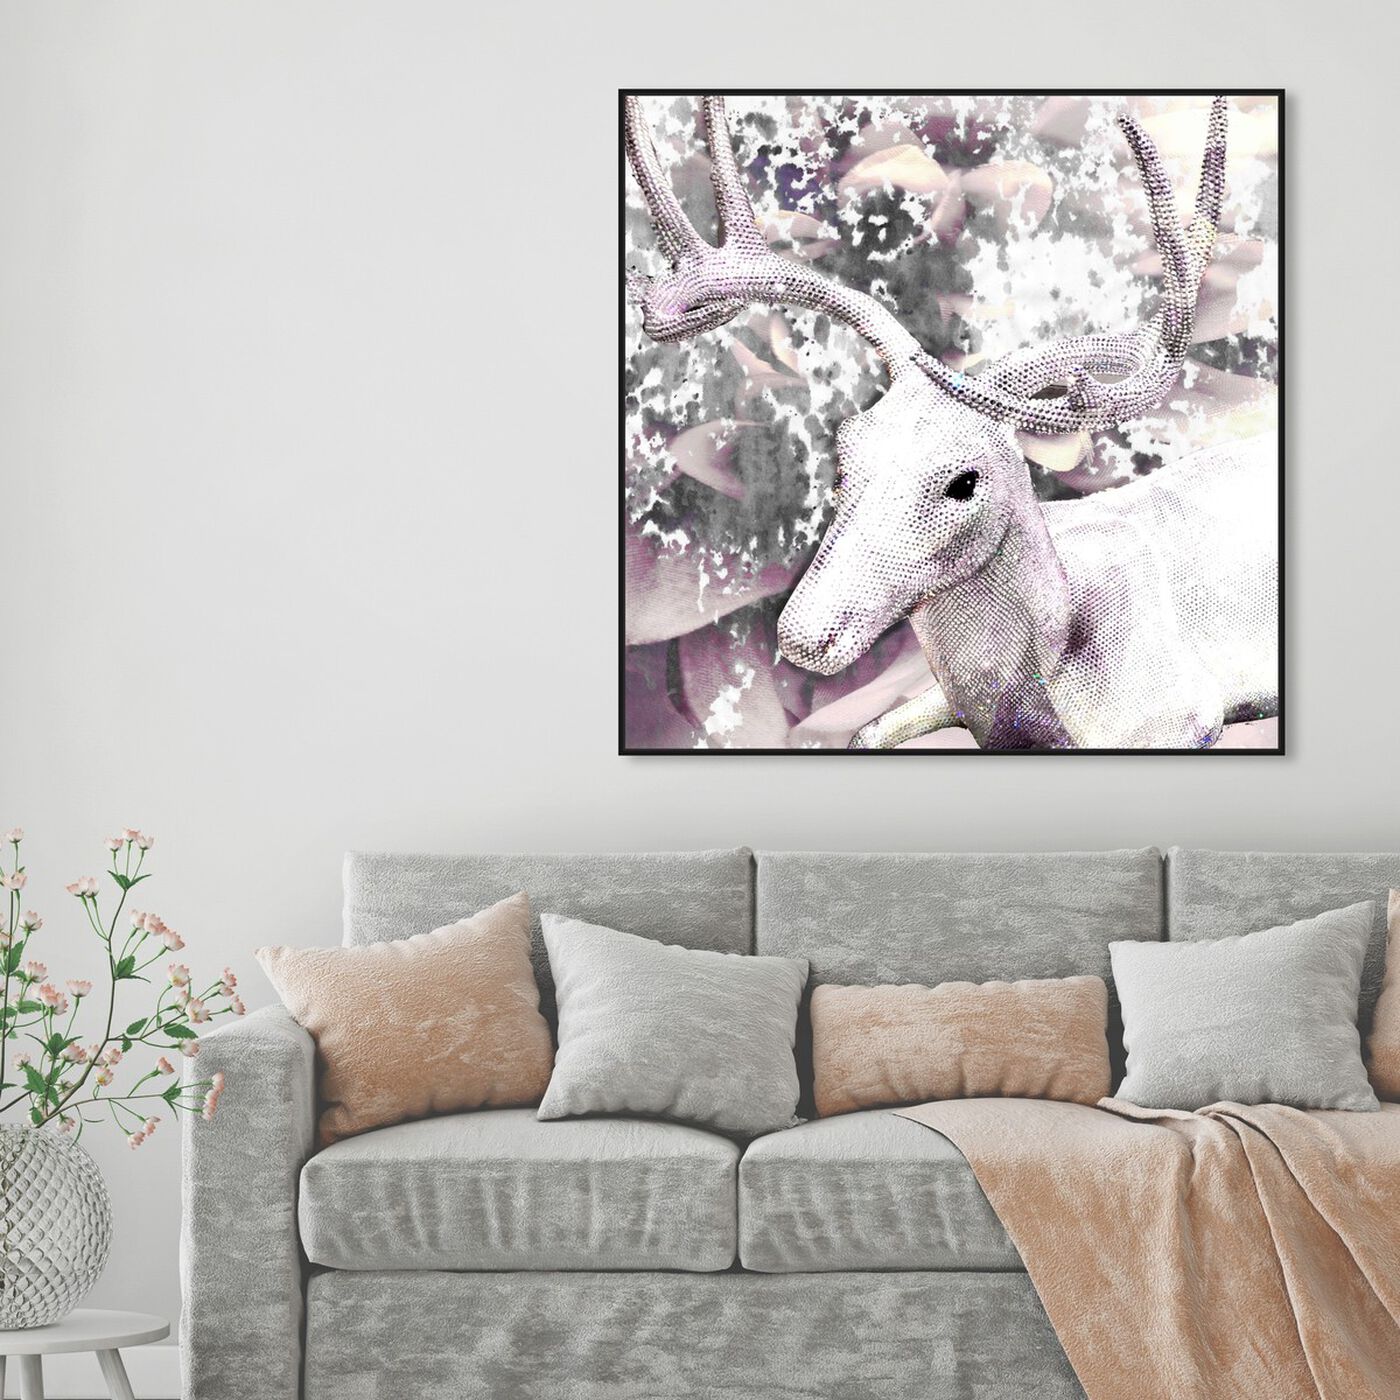 Hanging view of Marvelous Creature featuring animals and zoo and wild animals art.